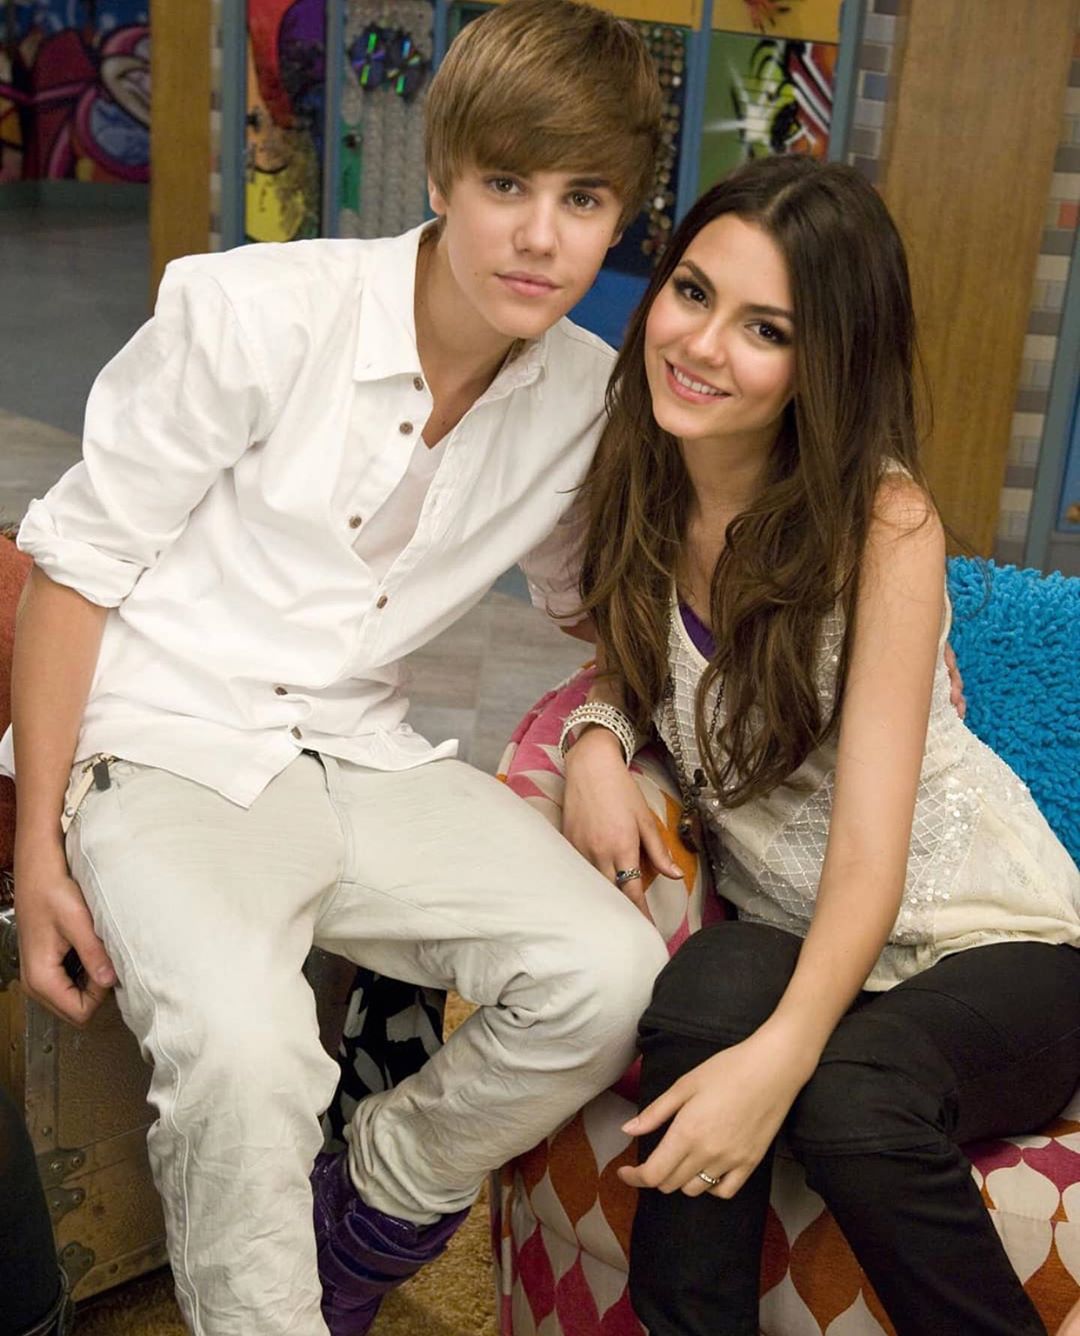 Throwback: Justin Bieber's picture with Victoria Justice